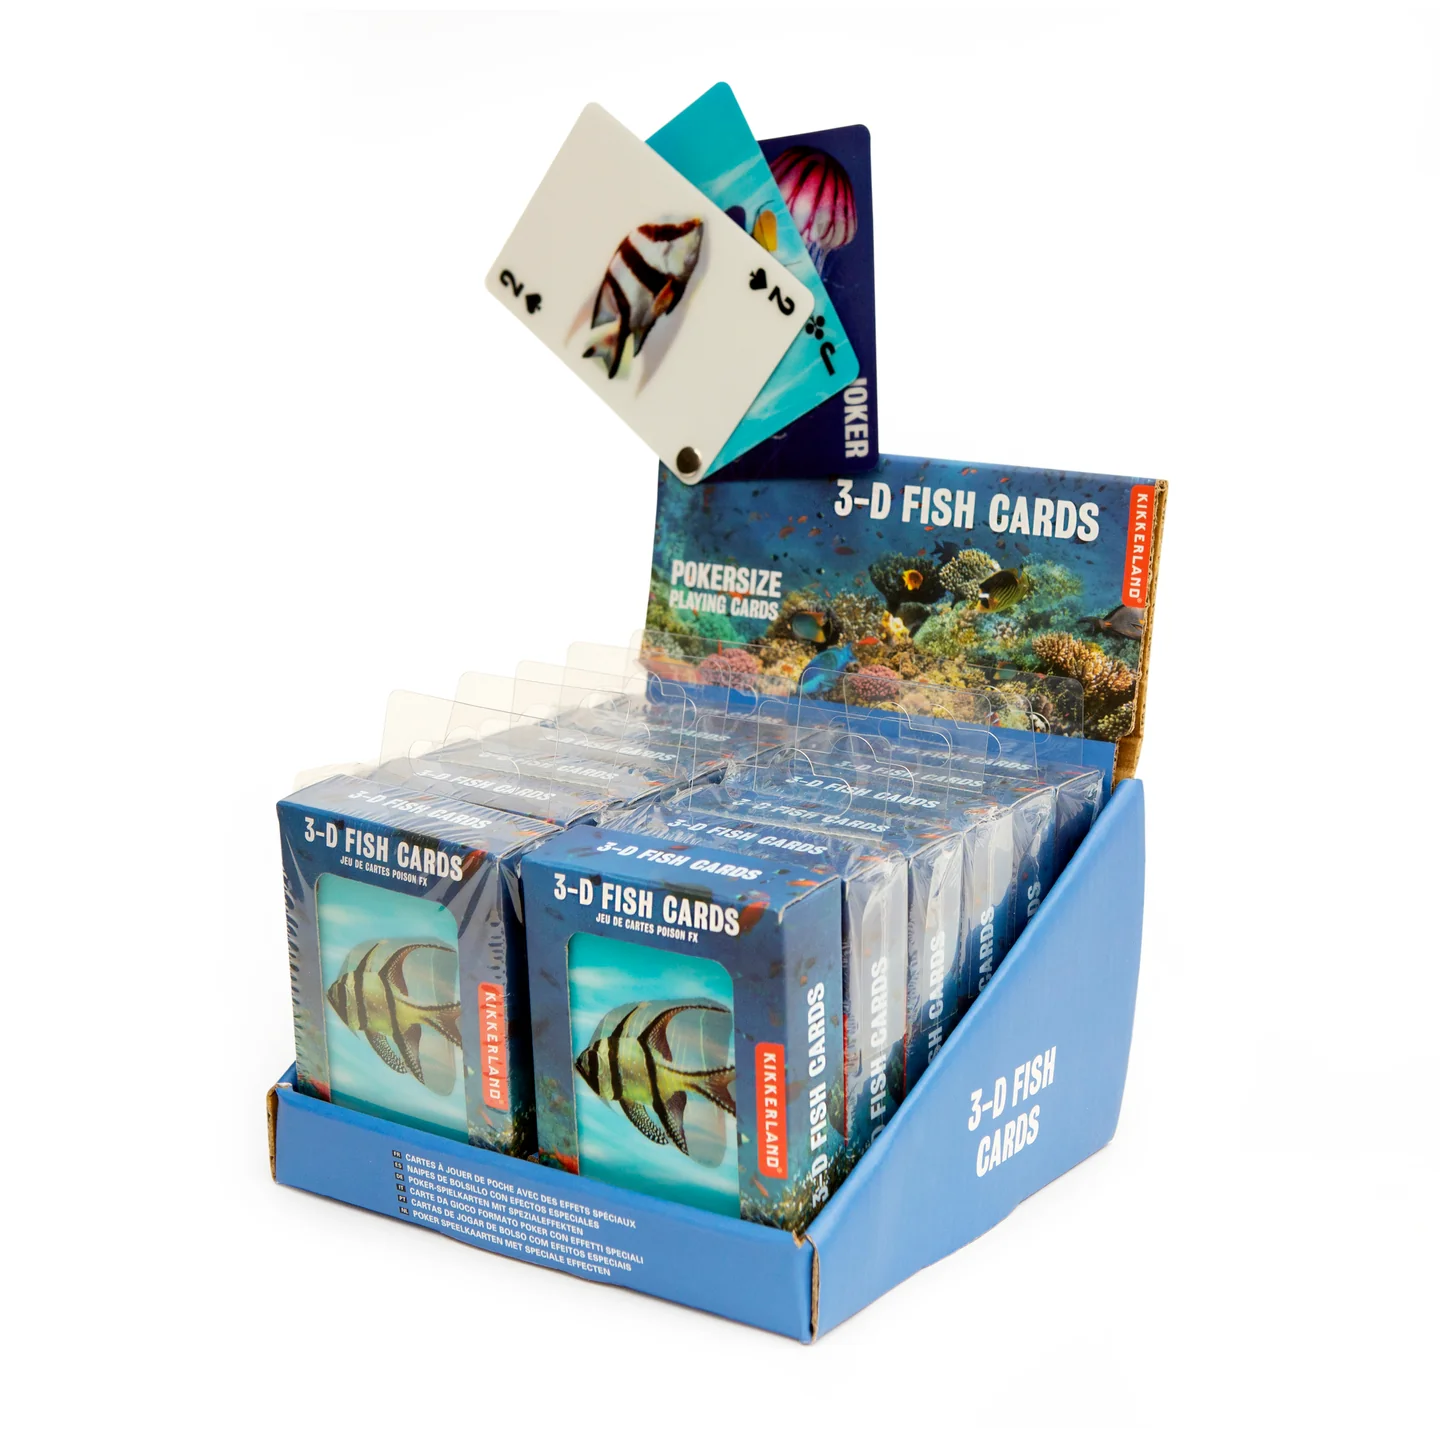 3D fish cards by kikkerland